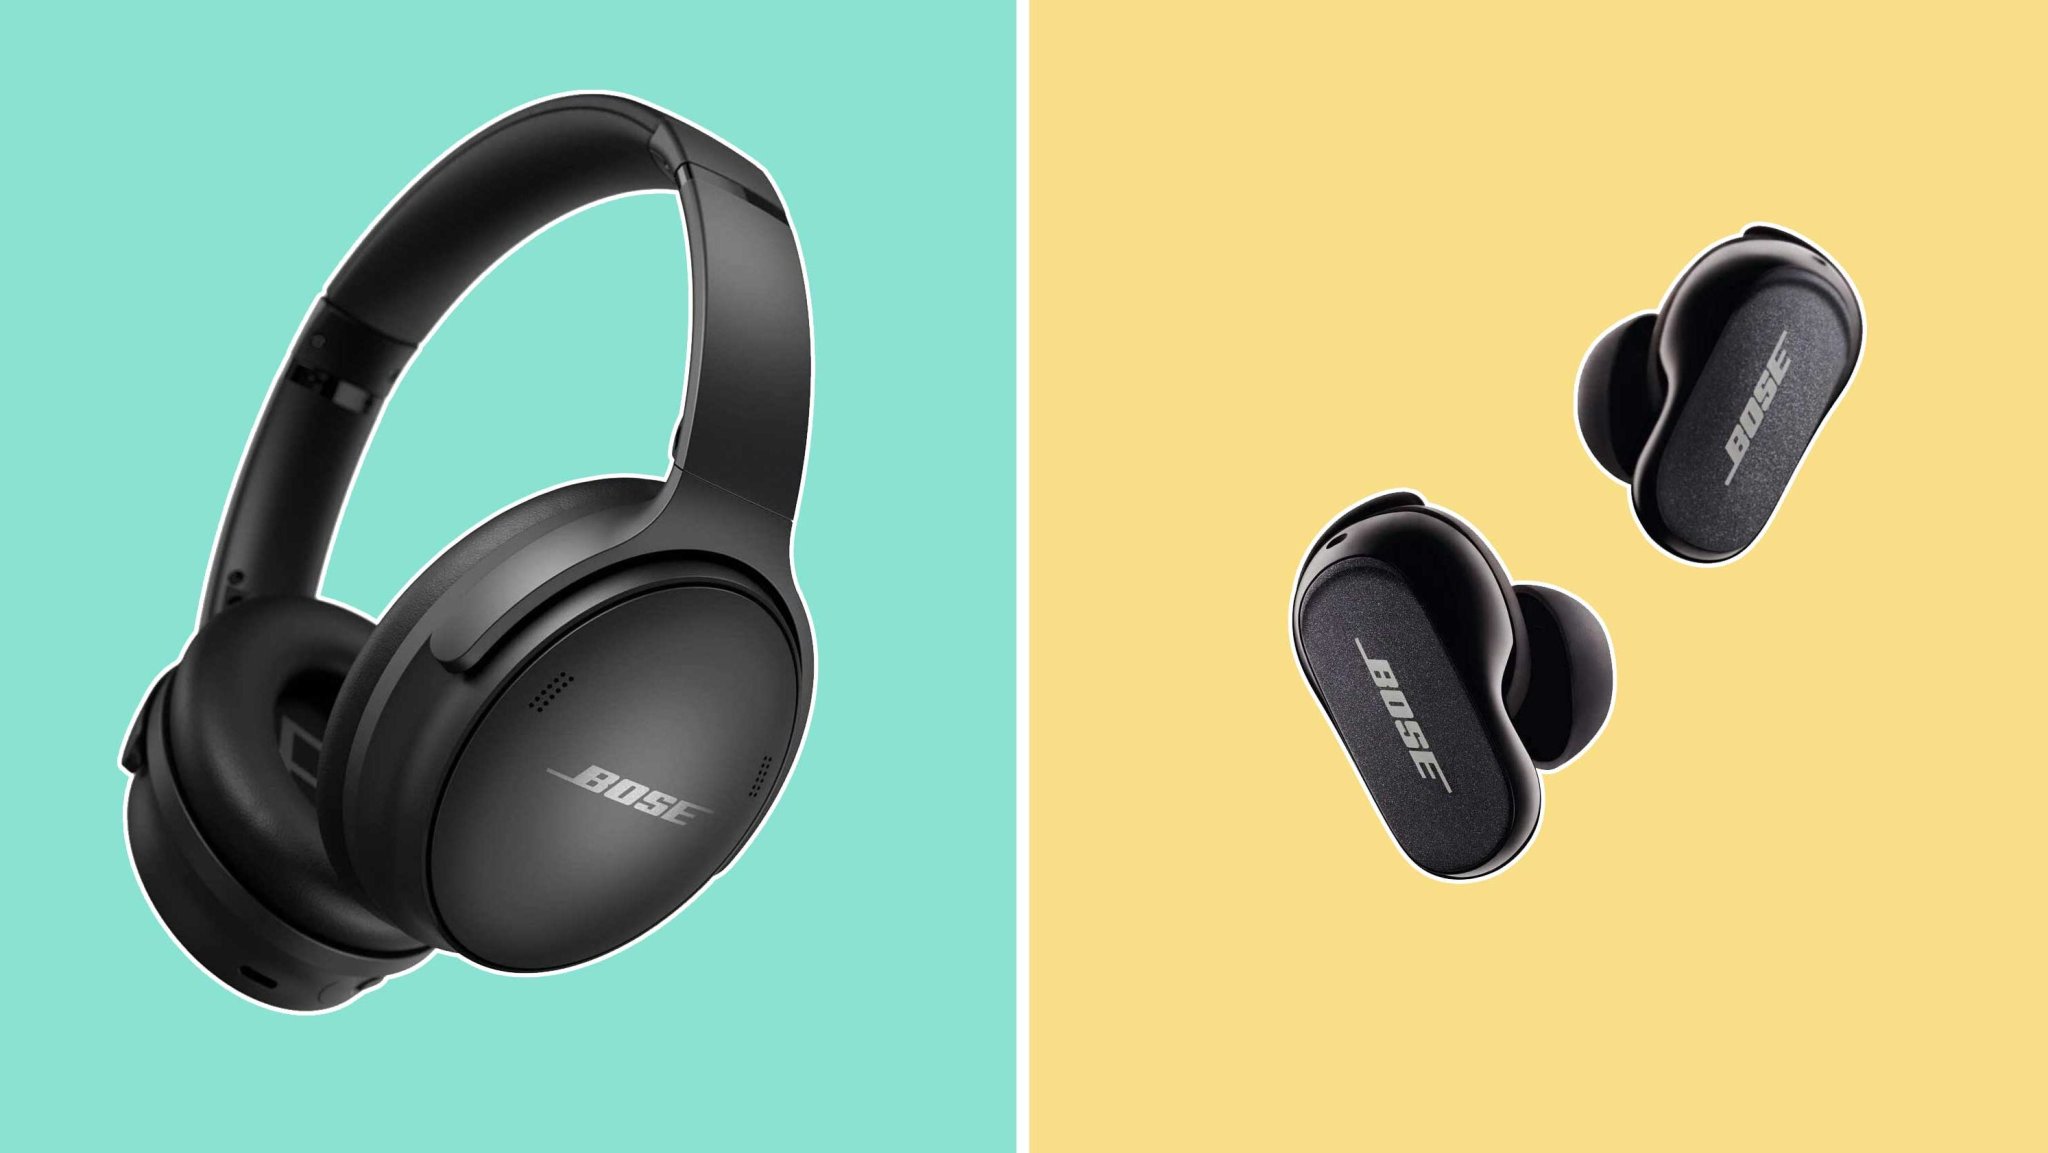 Reviewed-approved Bose QuietComfort noise-canceling headphones and earbuds are on sale